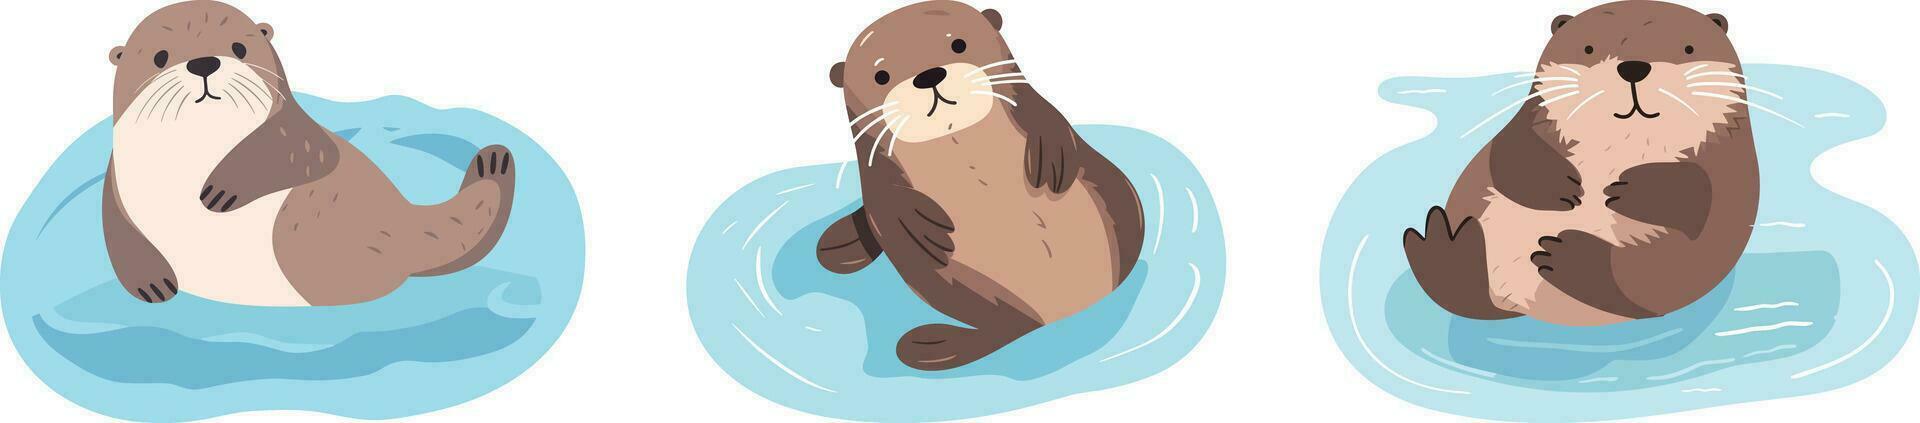 Sea otter floating on the water flat vector illustration, white background , isolated